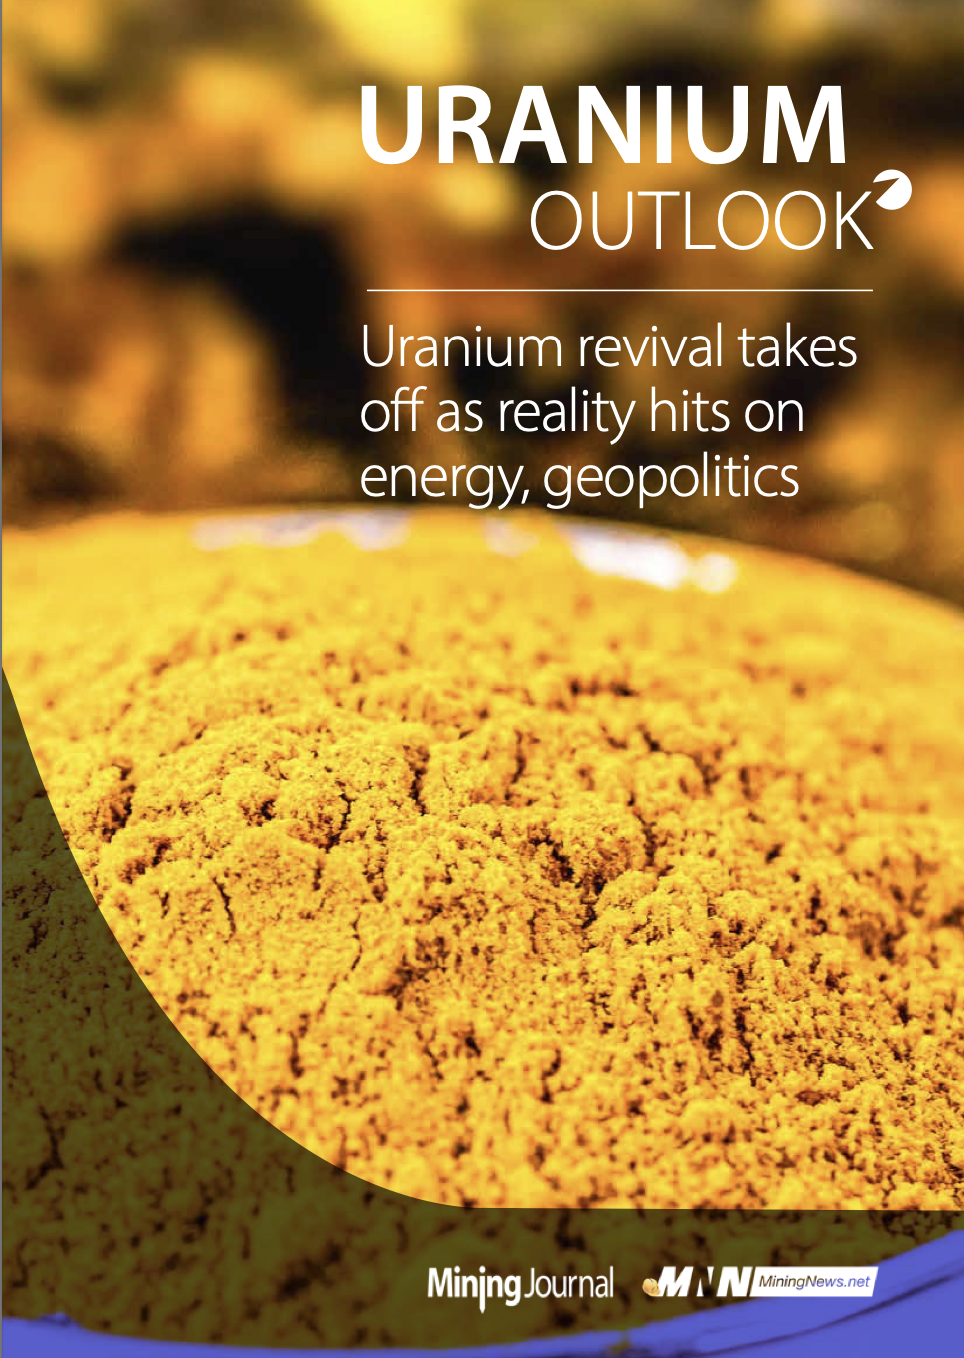 Uranium Outlook Uranium revival takes off as reality hits on energy